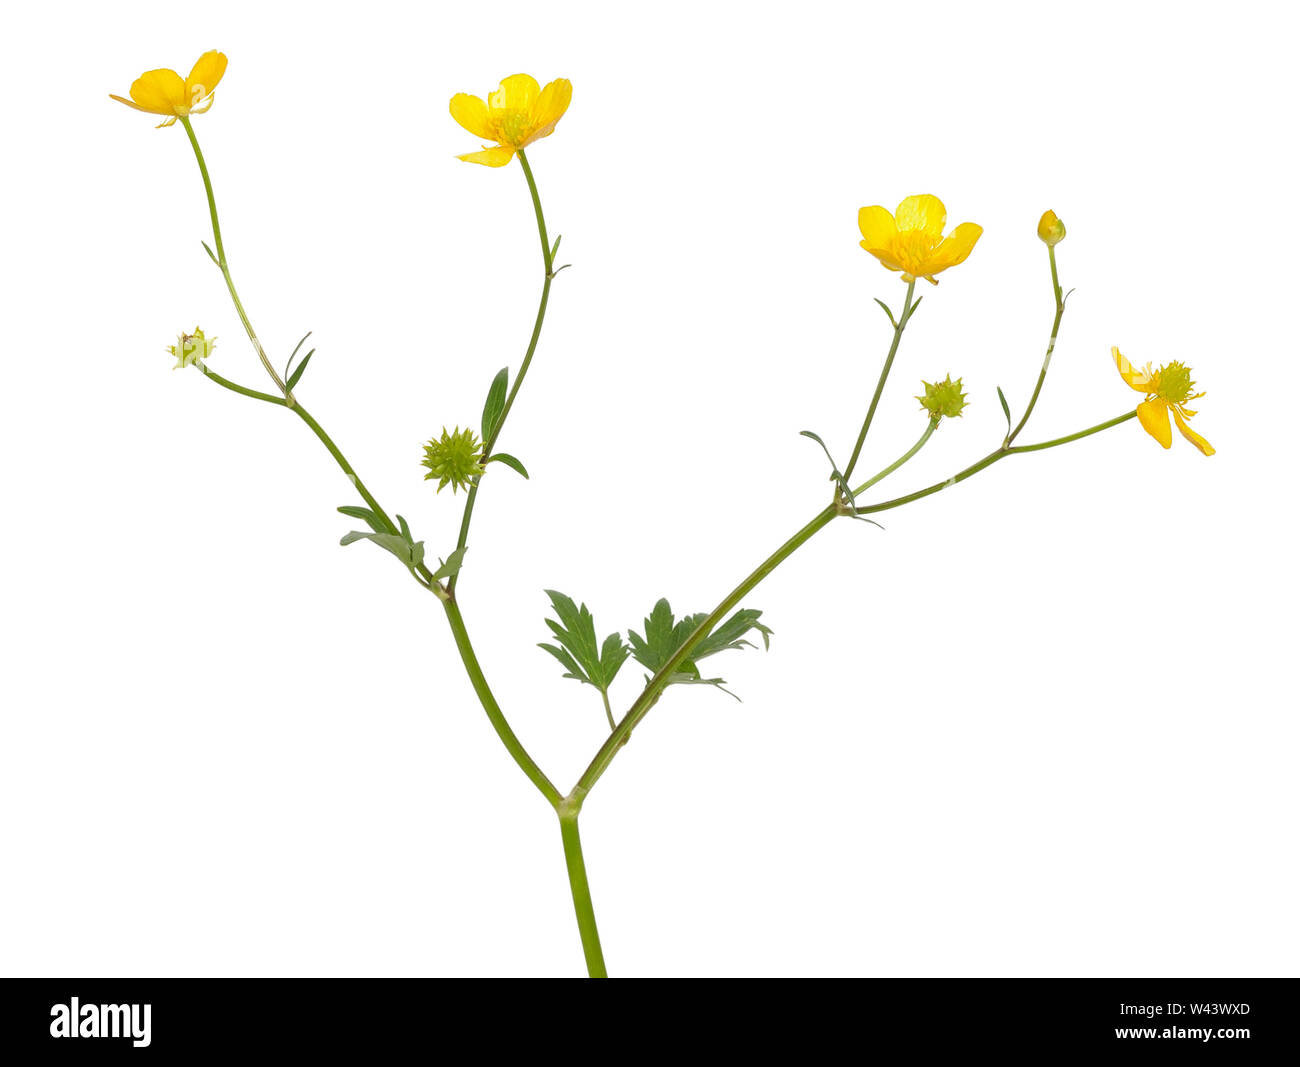 Meadow buttercup ( Ranunculus acris) flower isolated on a white background Stock Photo